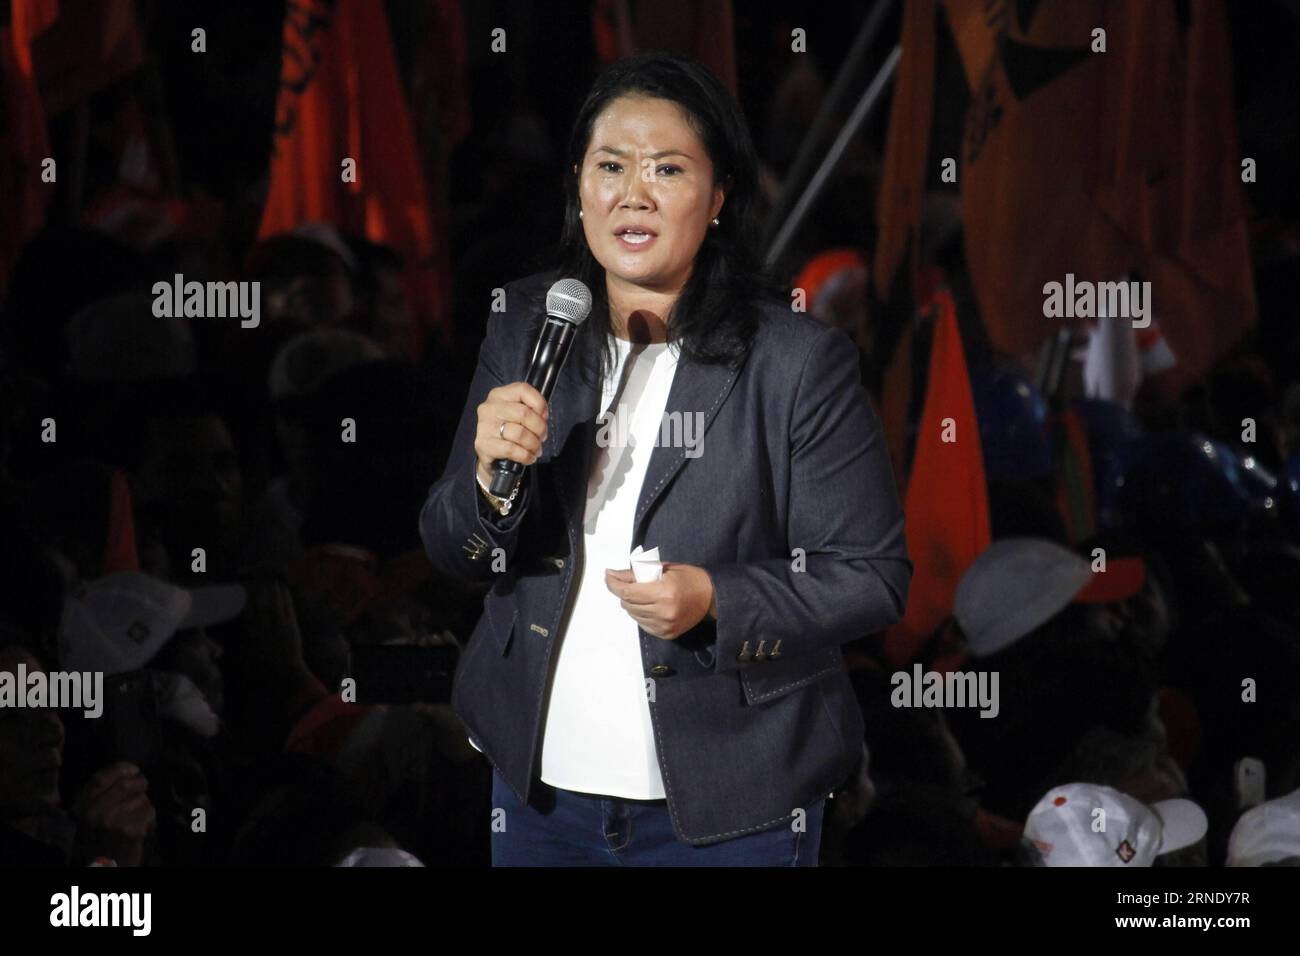 (160603) -- LIMA, June 3, 2016 -- Peruvian presidential hopeful Keiko Fujimori of the center-right Popular Force (FP) Party addresses a campaign closing for the second round of elections in Peru, in the Villa El Salvador District, Lima province, Peru, on June 2, 2016. ) PERU-LIMA-POLITICS-ELECTIONS LuisxCamacho PUBLICATIONxNOTxINxCHN   160603 Lima June 3 2016 Peruvian Presidential hopeful Keiko Fujimori of The Center Right Popular Force FP Party addresses a Campaign CLOSING for The Second Round of Elections in Peru in The Villa El Salvador District Lima Province Peru ON June 2 2016 Peru Lima P Stock Photo